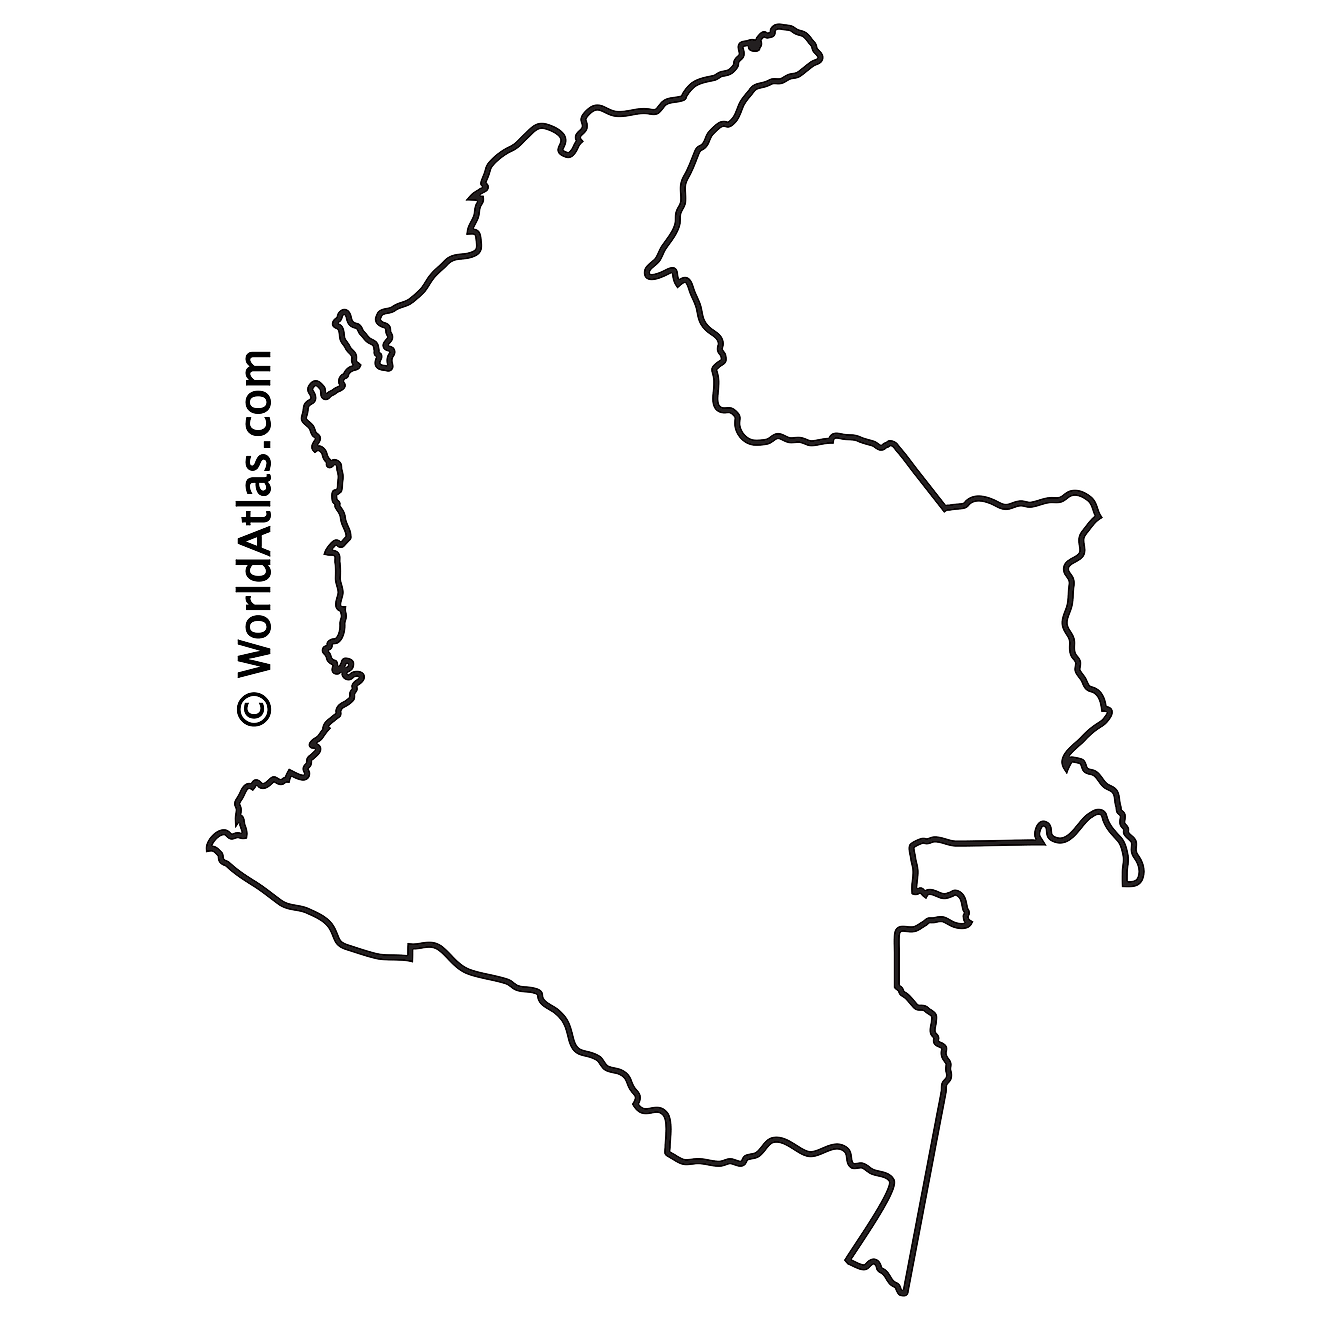 Outline map of Colombia